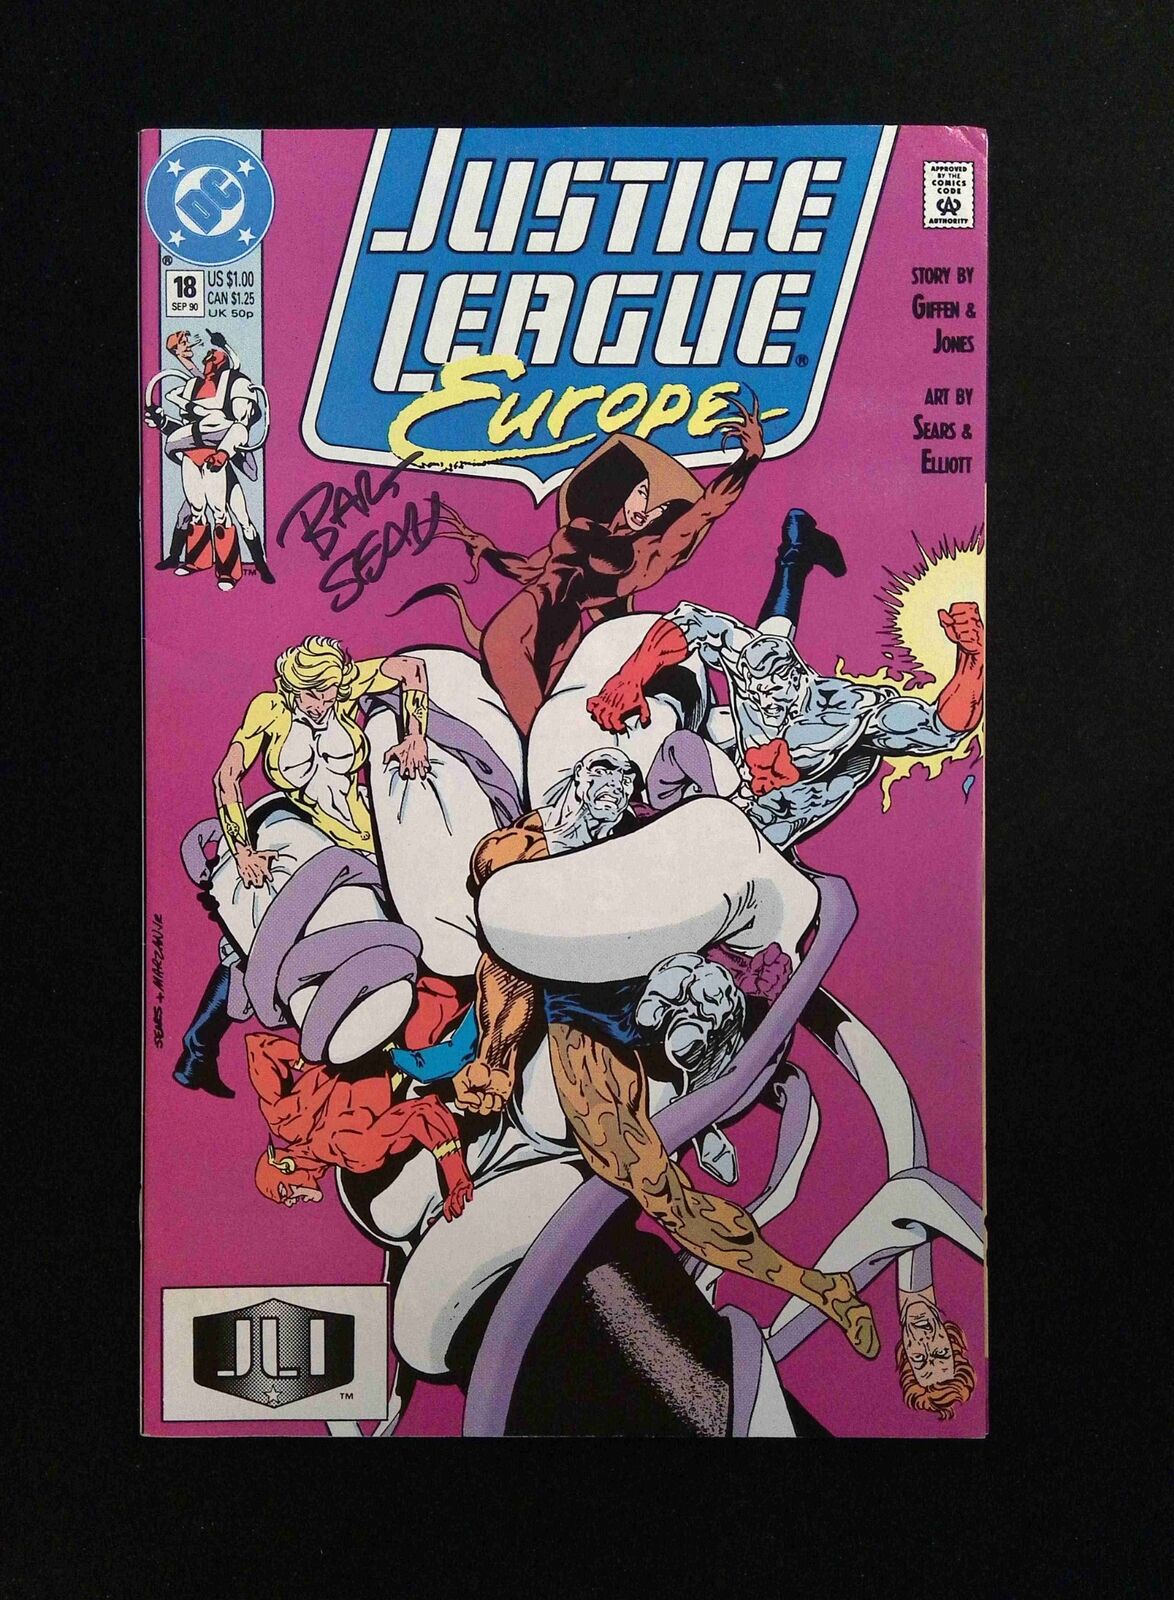 Justice League Europe #18  DC Comics 1990 FN/VF  Signed By Bart Sears